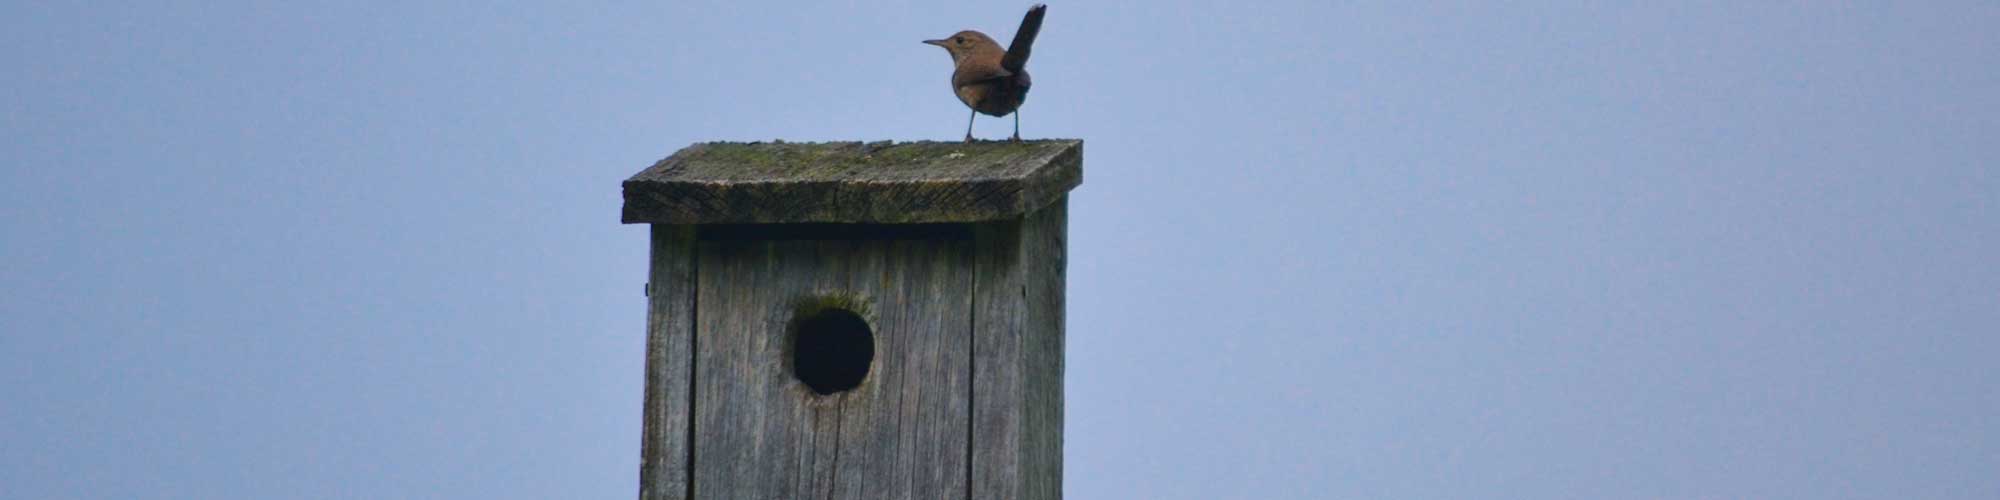 Nestbox with House Wren